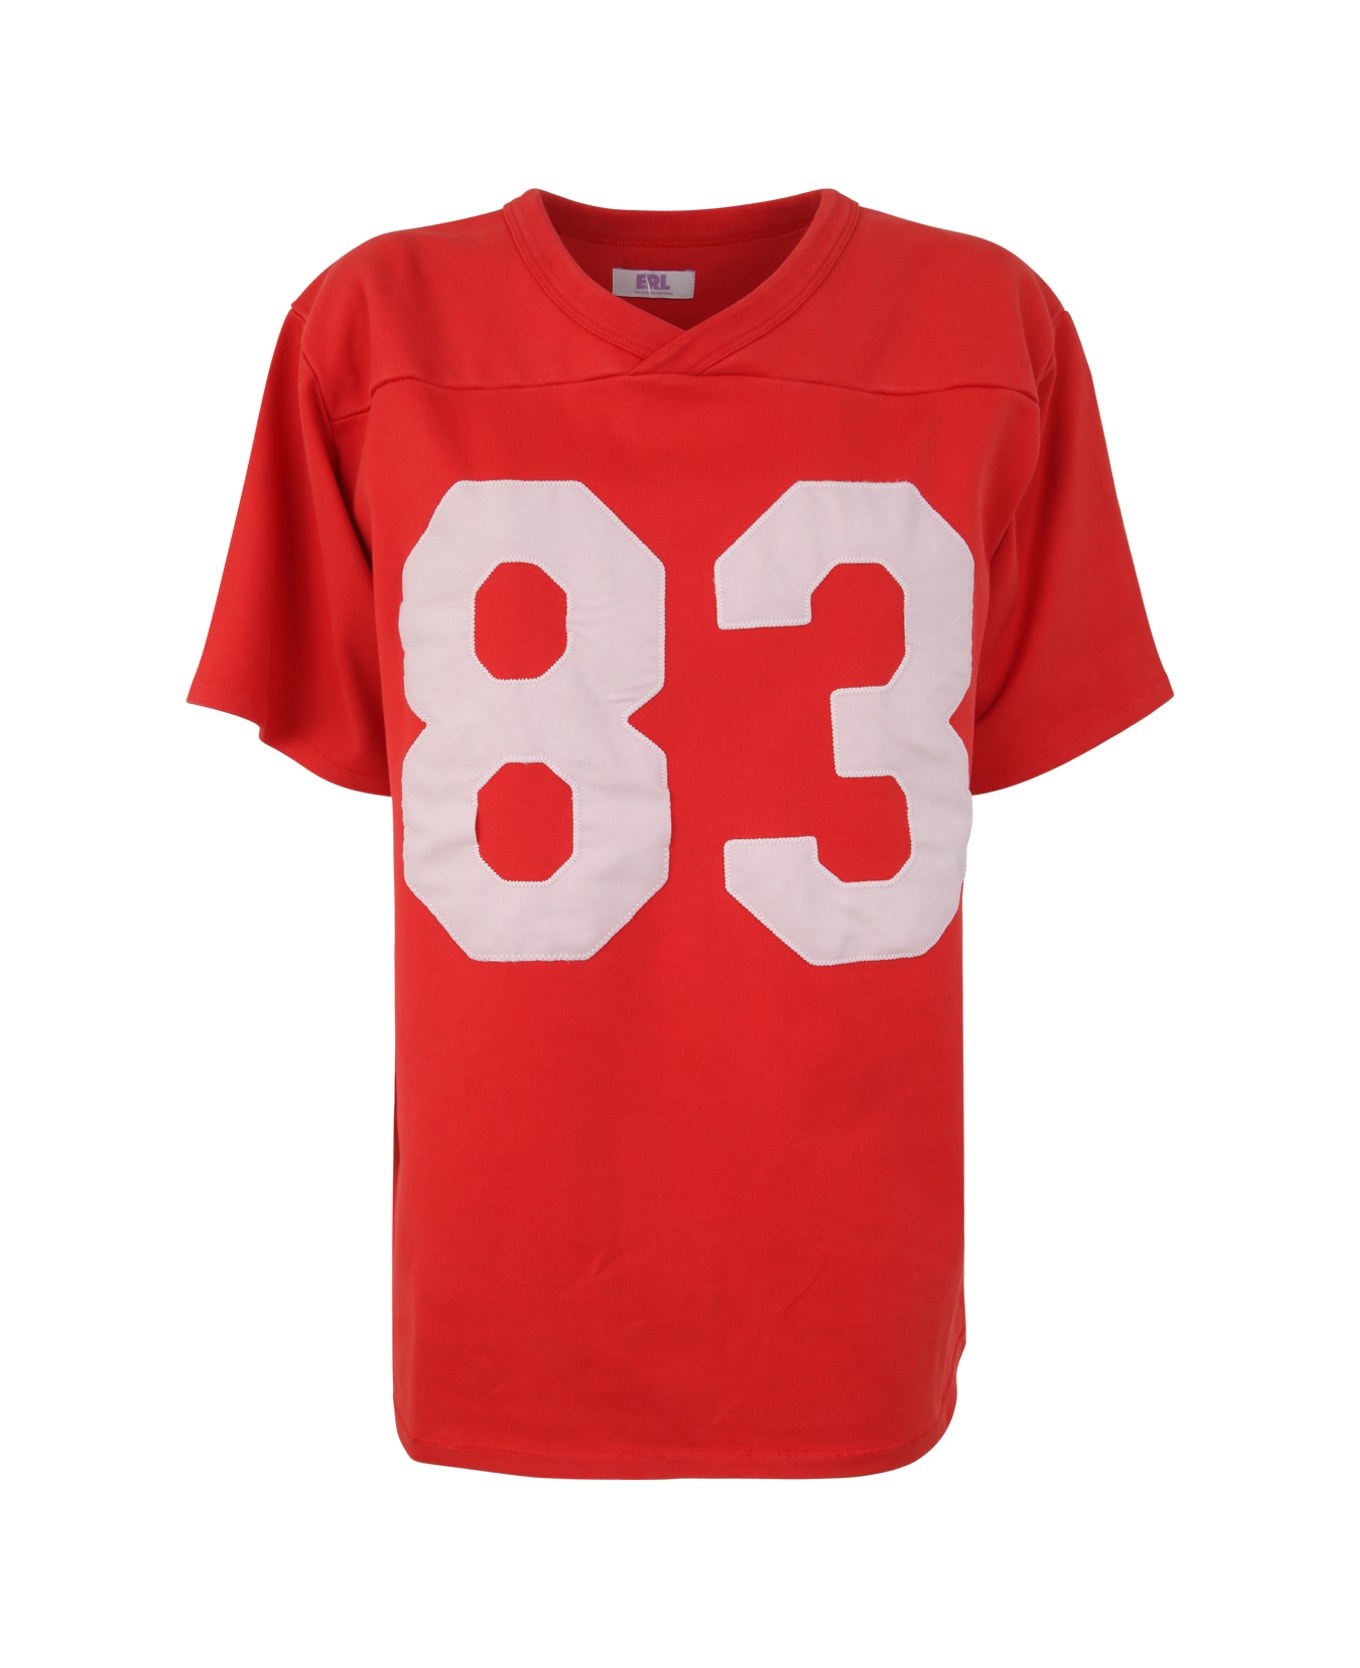 ERL Unisex Football Shirt Knit - Red Tシャツ